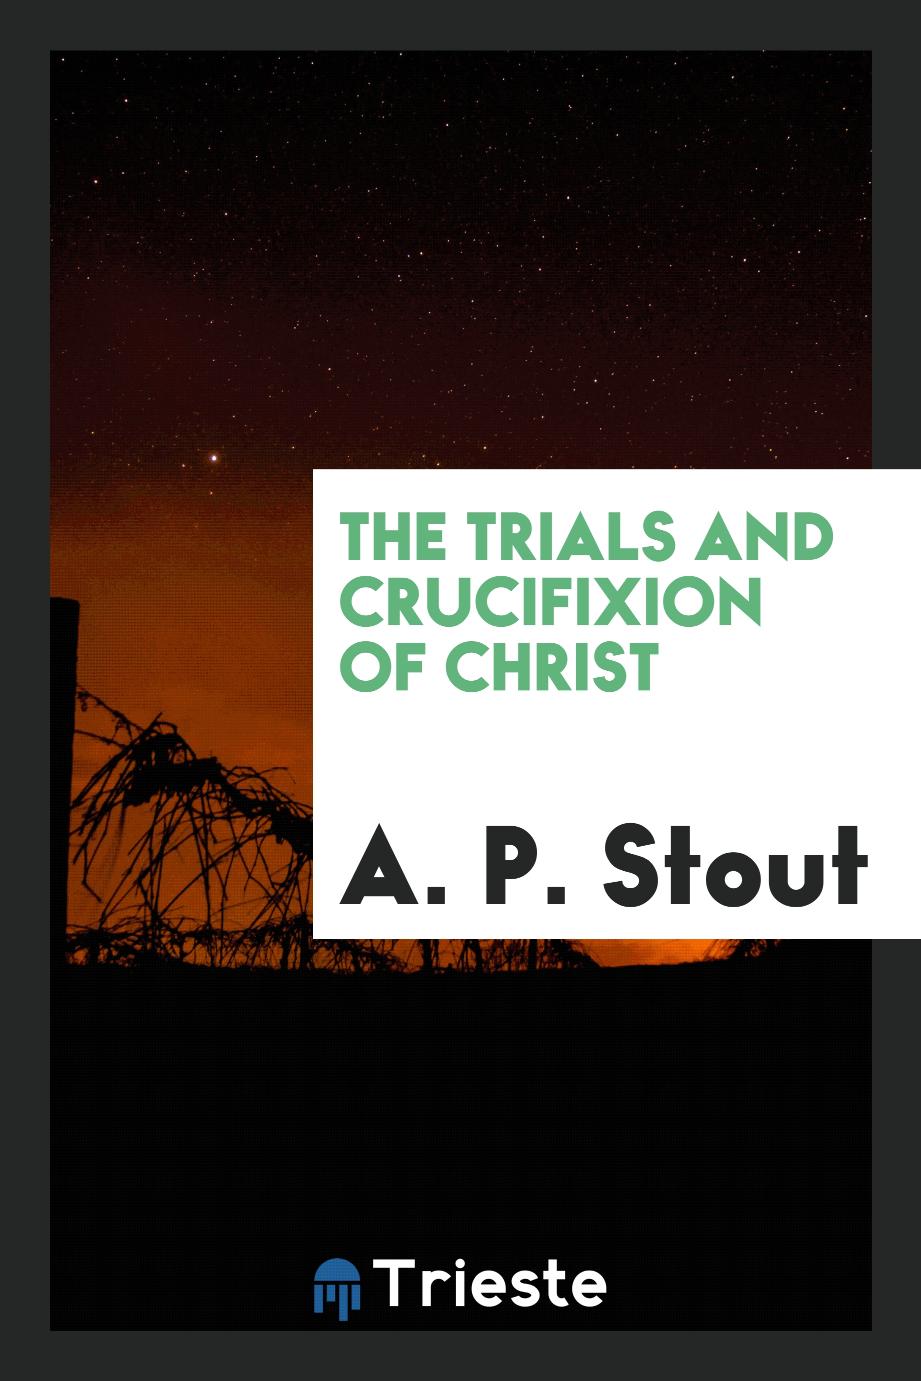 The trials and crucifixion of Christ